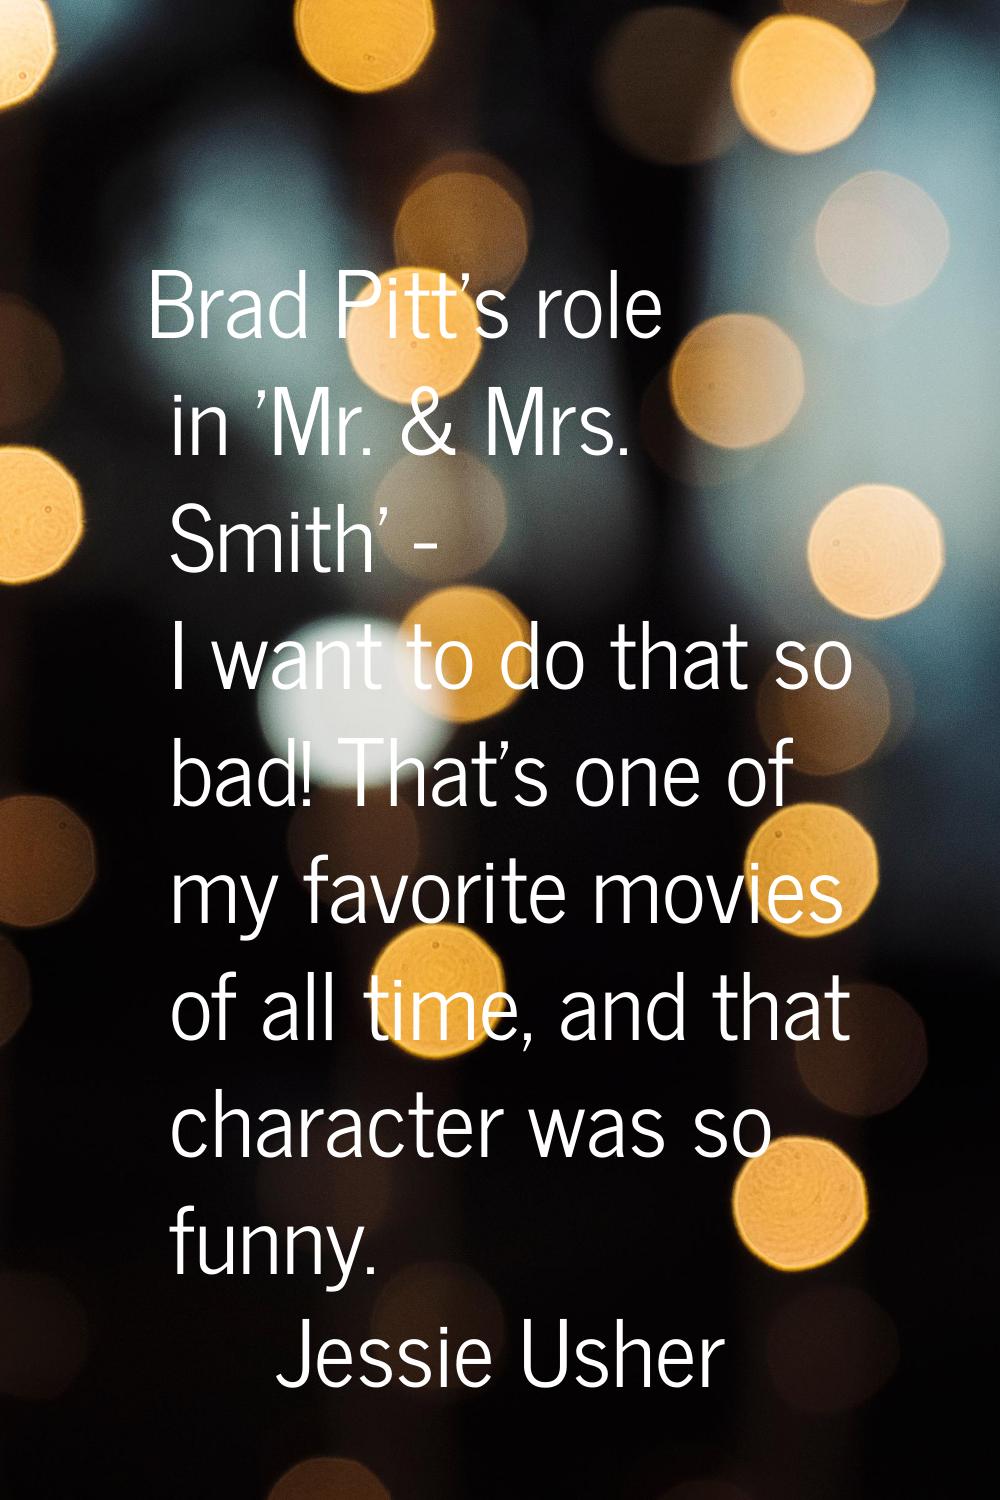 Brad Pitt's role in 'Mr. & Mrs. Smith' - I want to do that so bad! That's one of my favorite movies